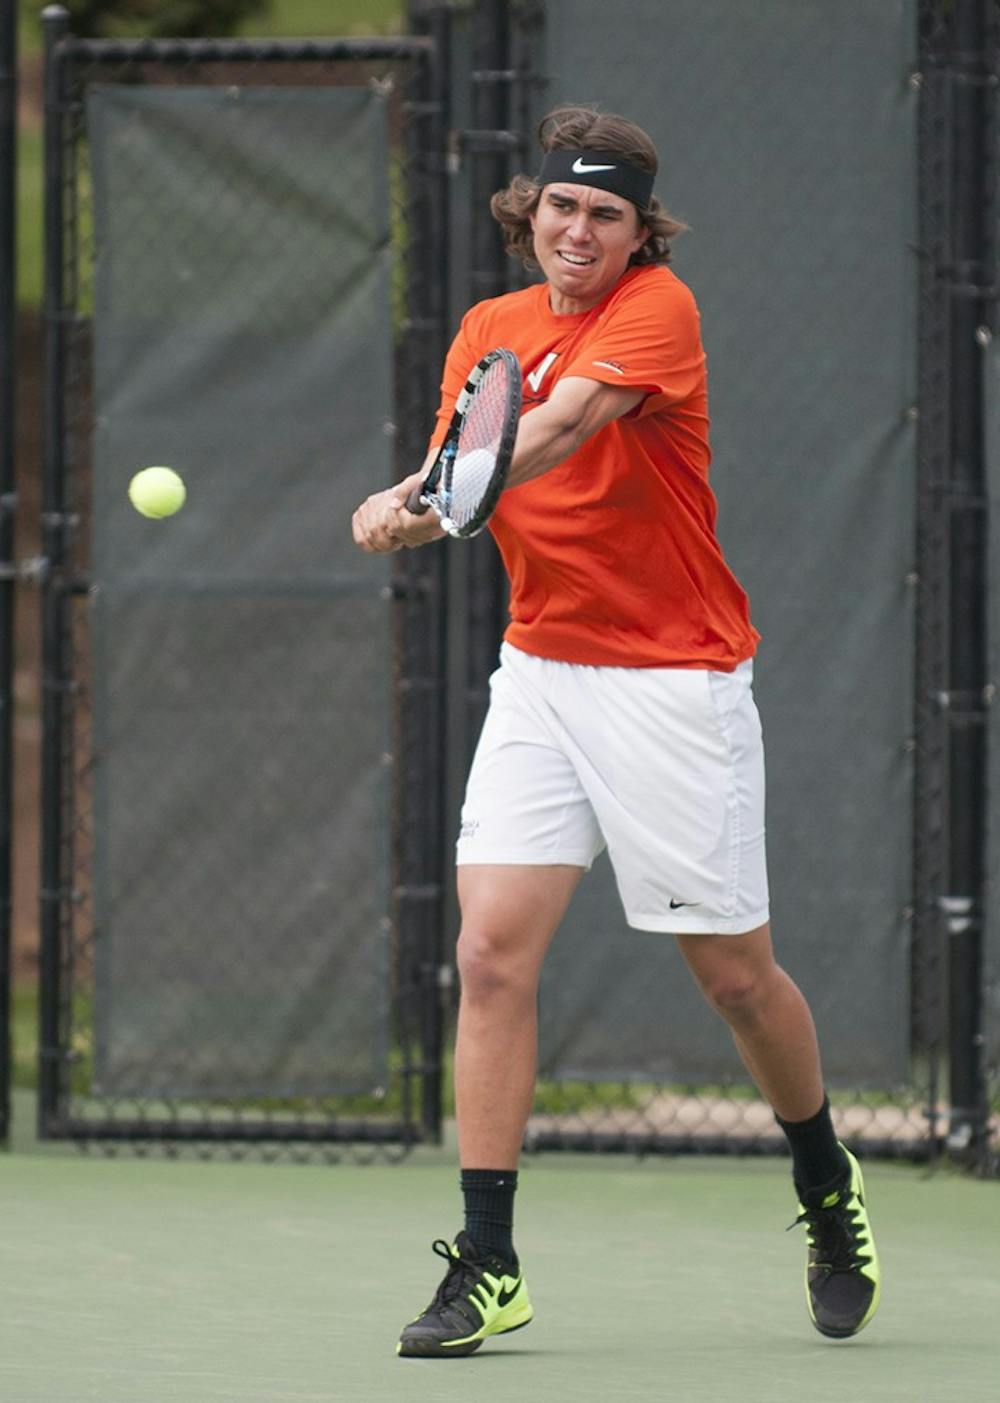 <p>Collin Altamirano won&nbsp;his match&nbsp;6-3, 6-4 against Georgia Tech and 6-0, 6-0 against Clemson. The Cavaliers went 2-0 over the weekend.</p>